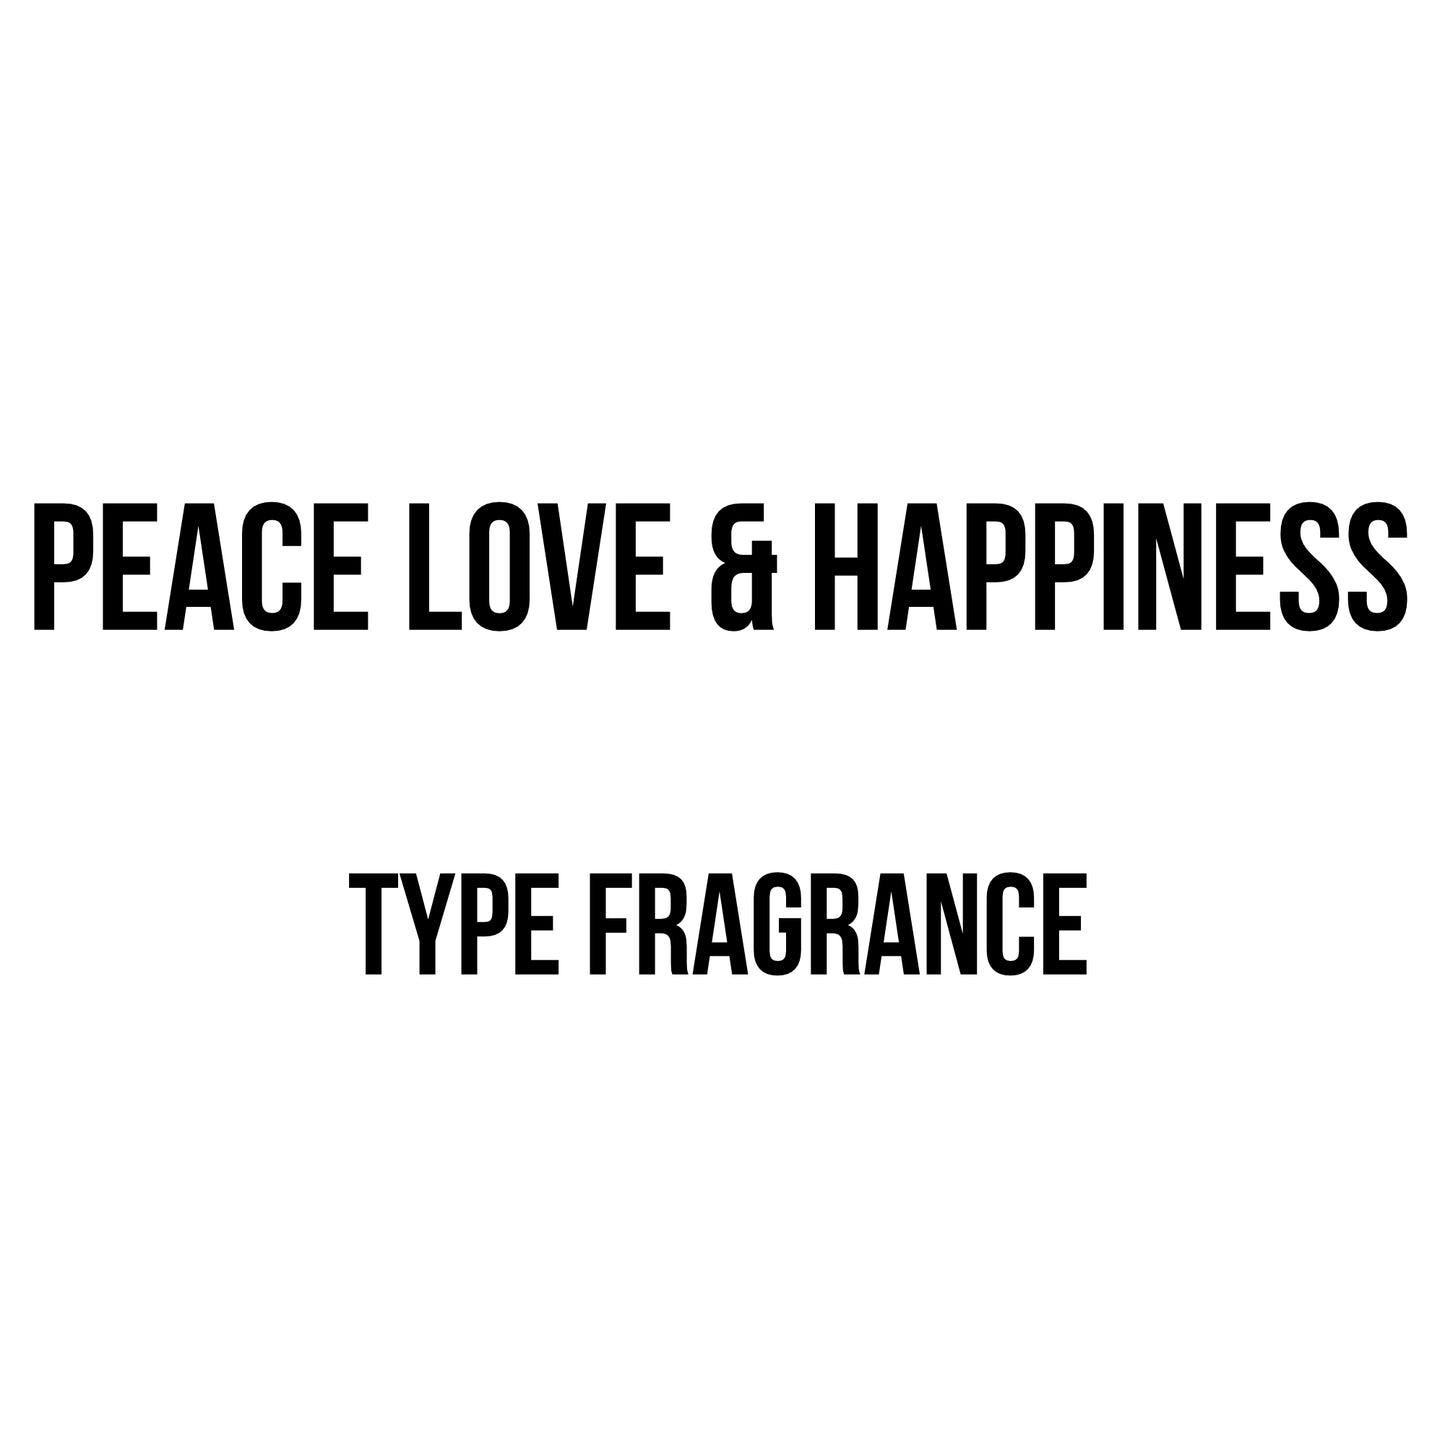 Peace Love & Happiness Type Fragrance